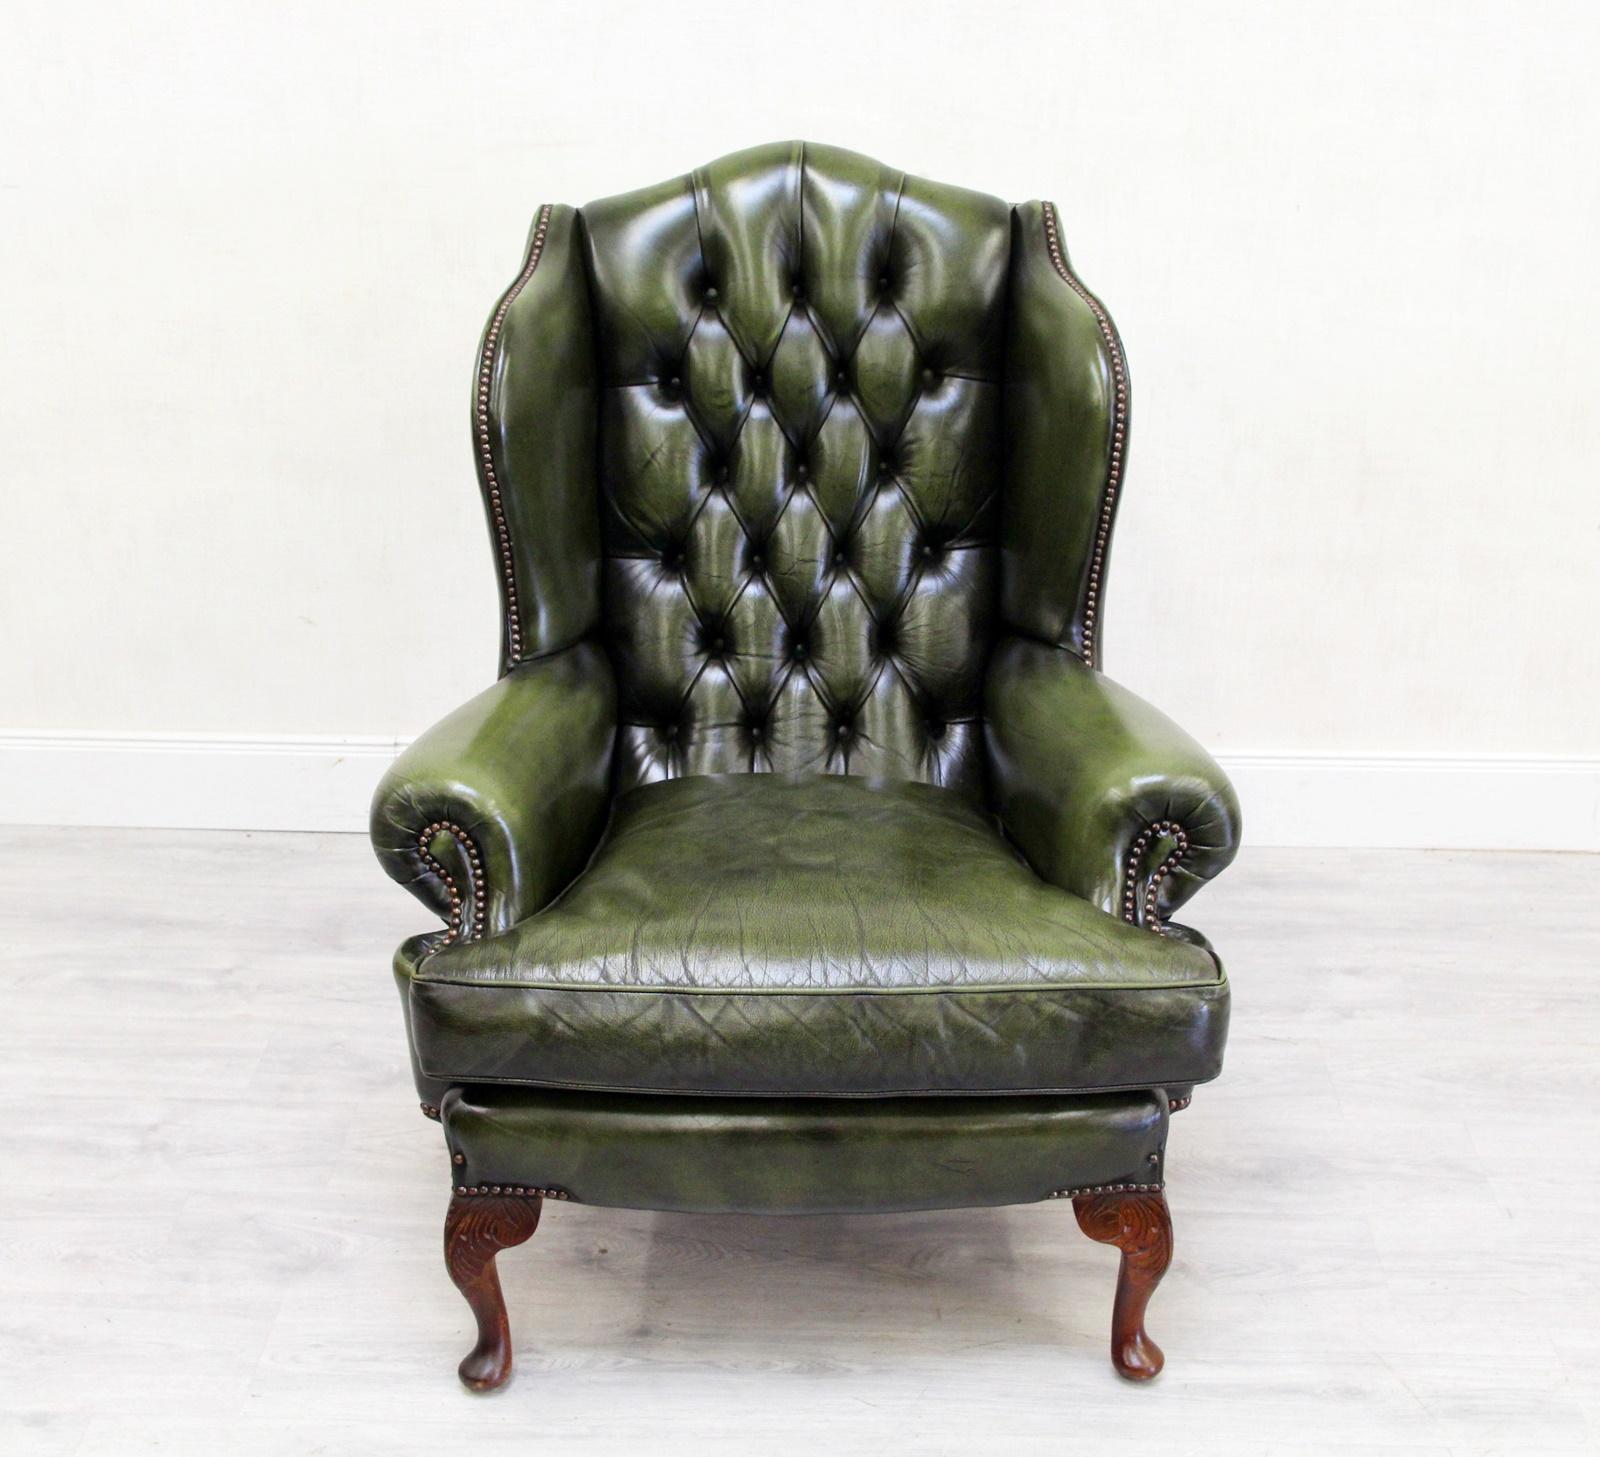 2 Chesterfield armchairs
The shape is classic (wing chair)
Measures: armchair
Measures: H x 105 cm, W x 85 cm, D x 95 cm
Color green
Pillows: Down pillows
Condition: The armchairs are in a very good condition for the age and still have the